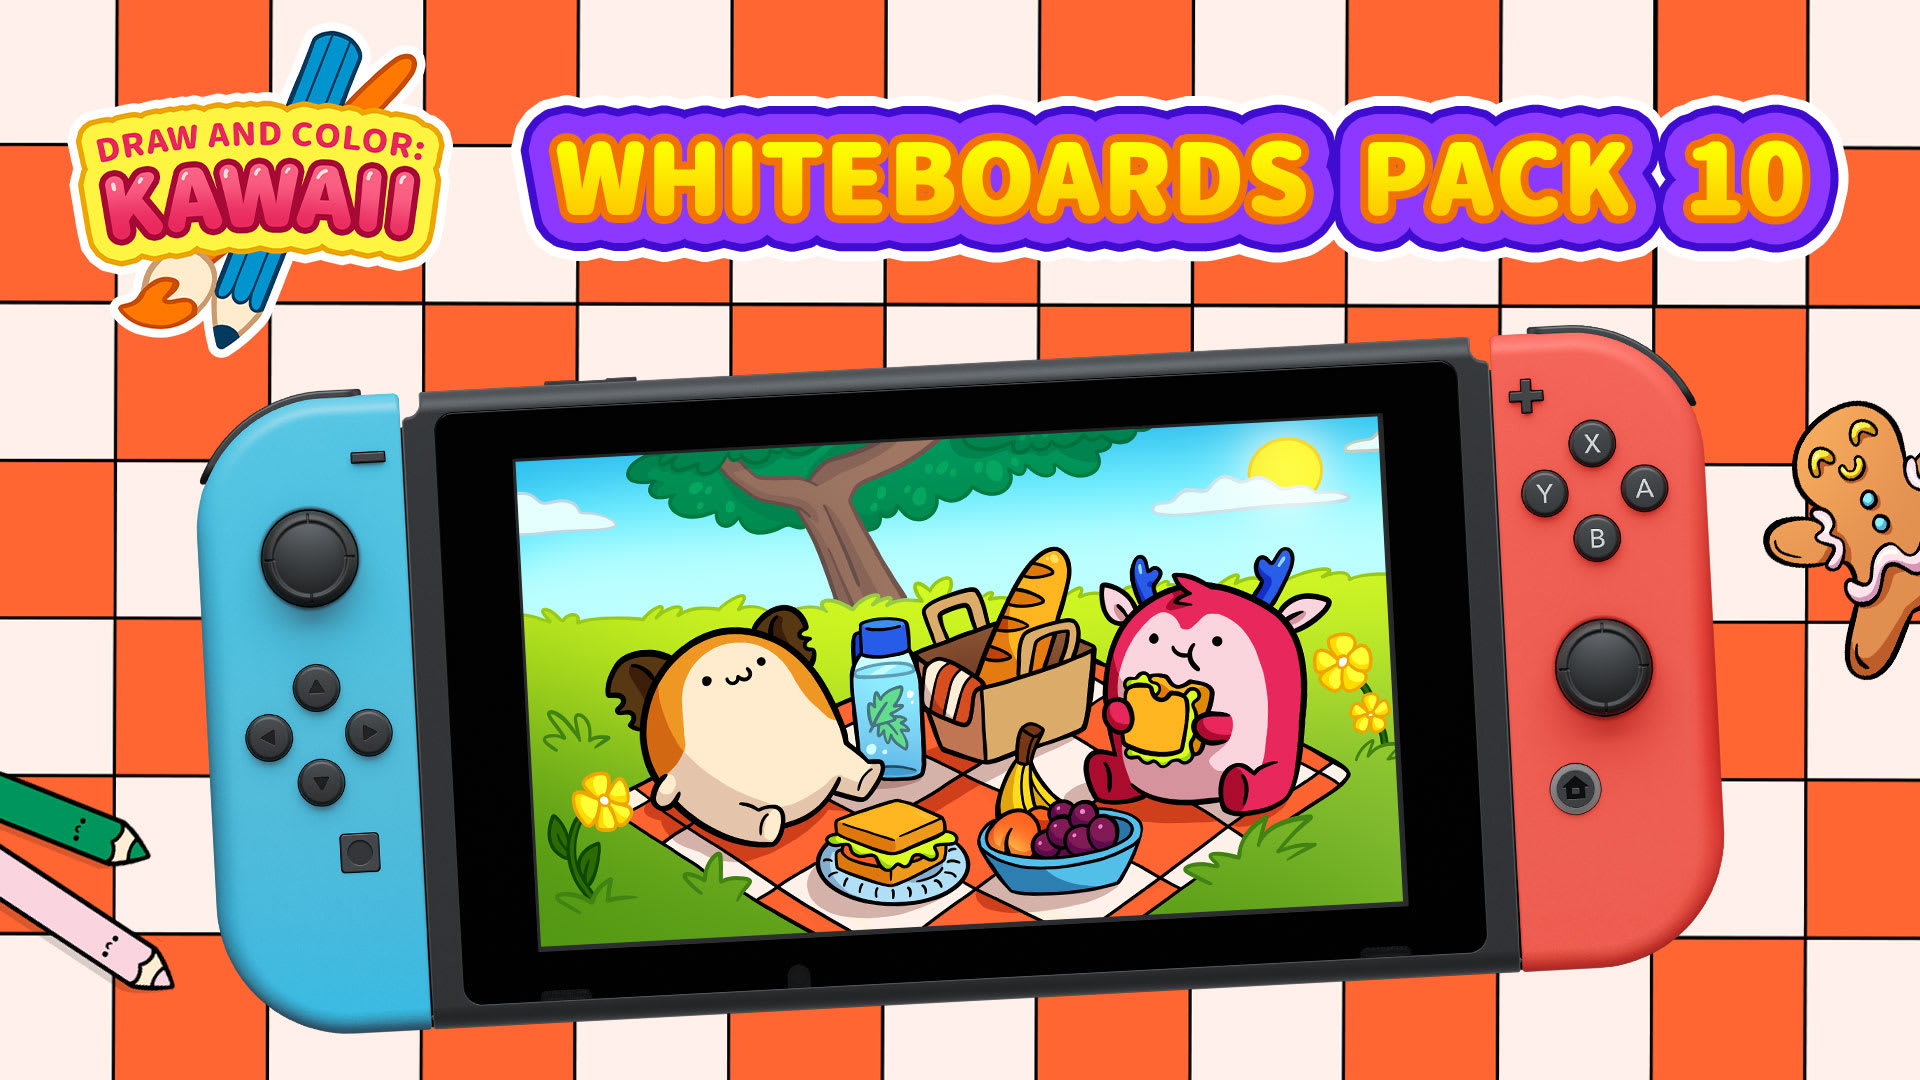 Whiteboards Pack 10